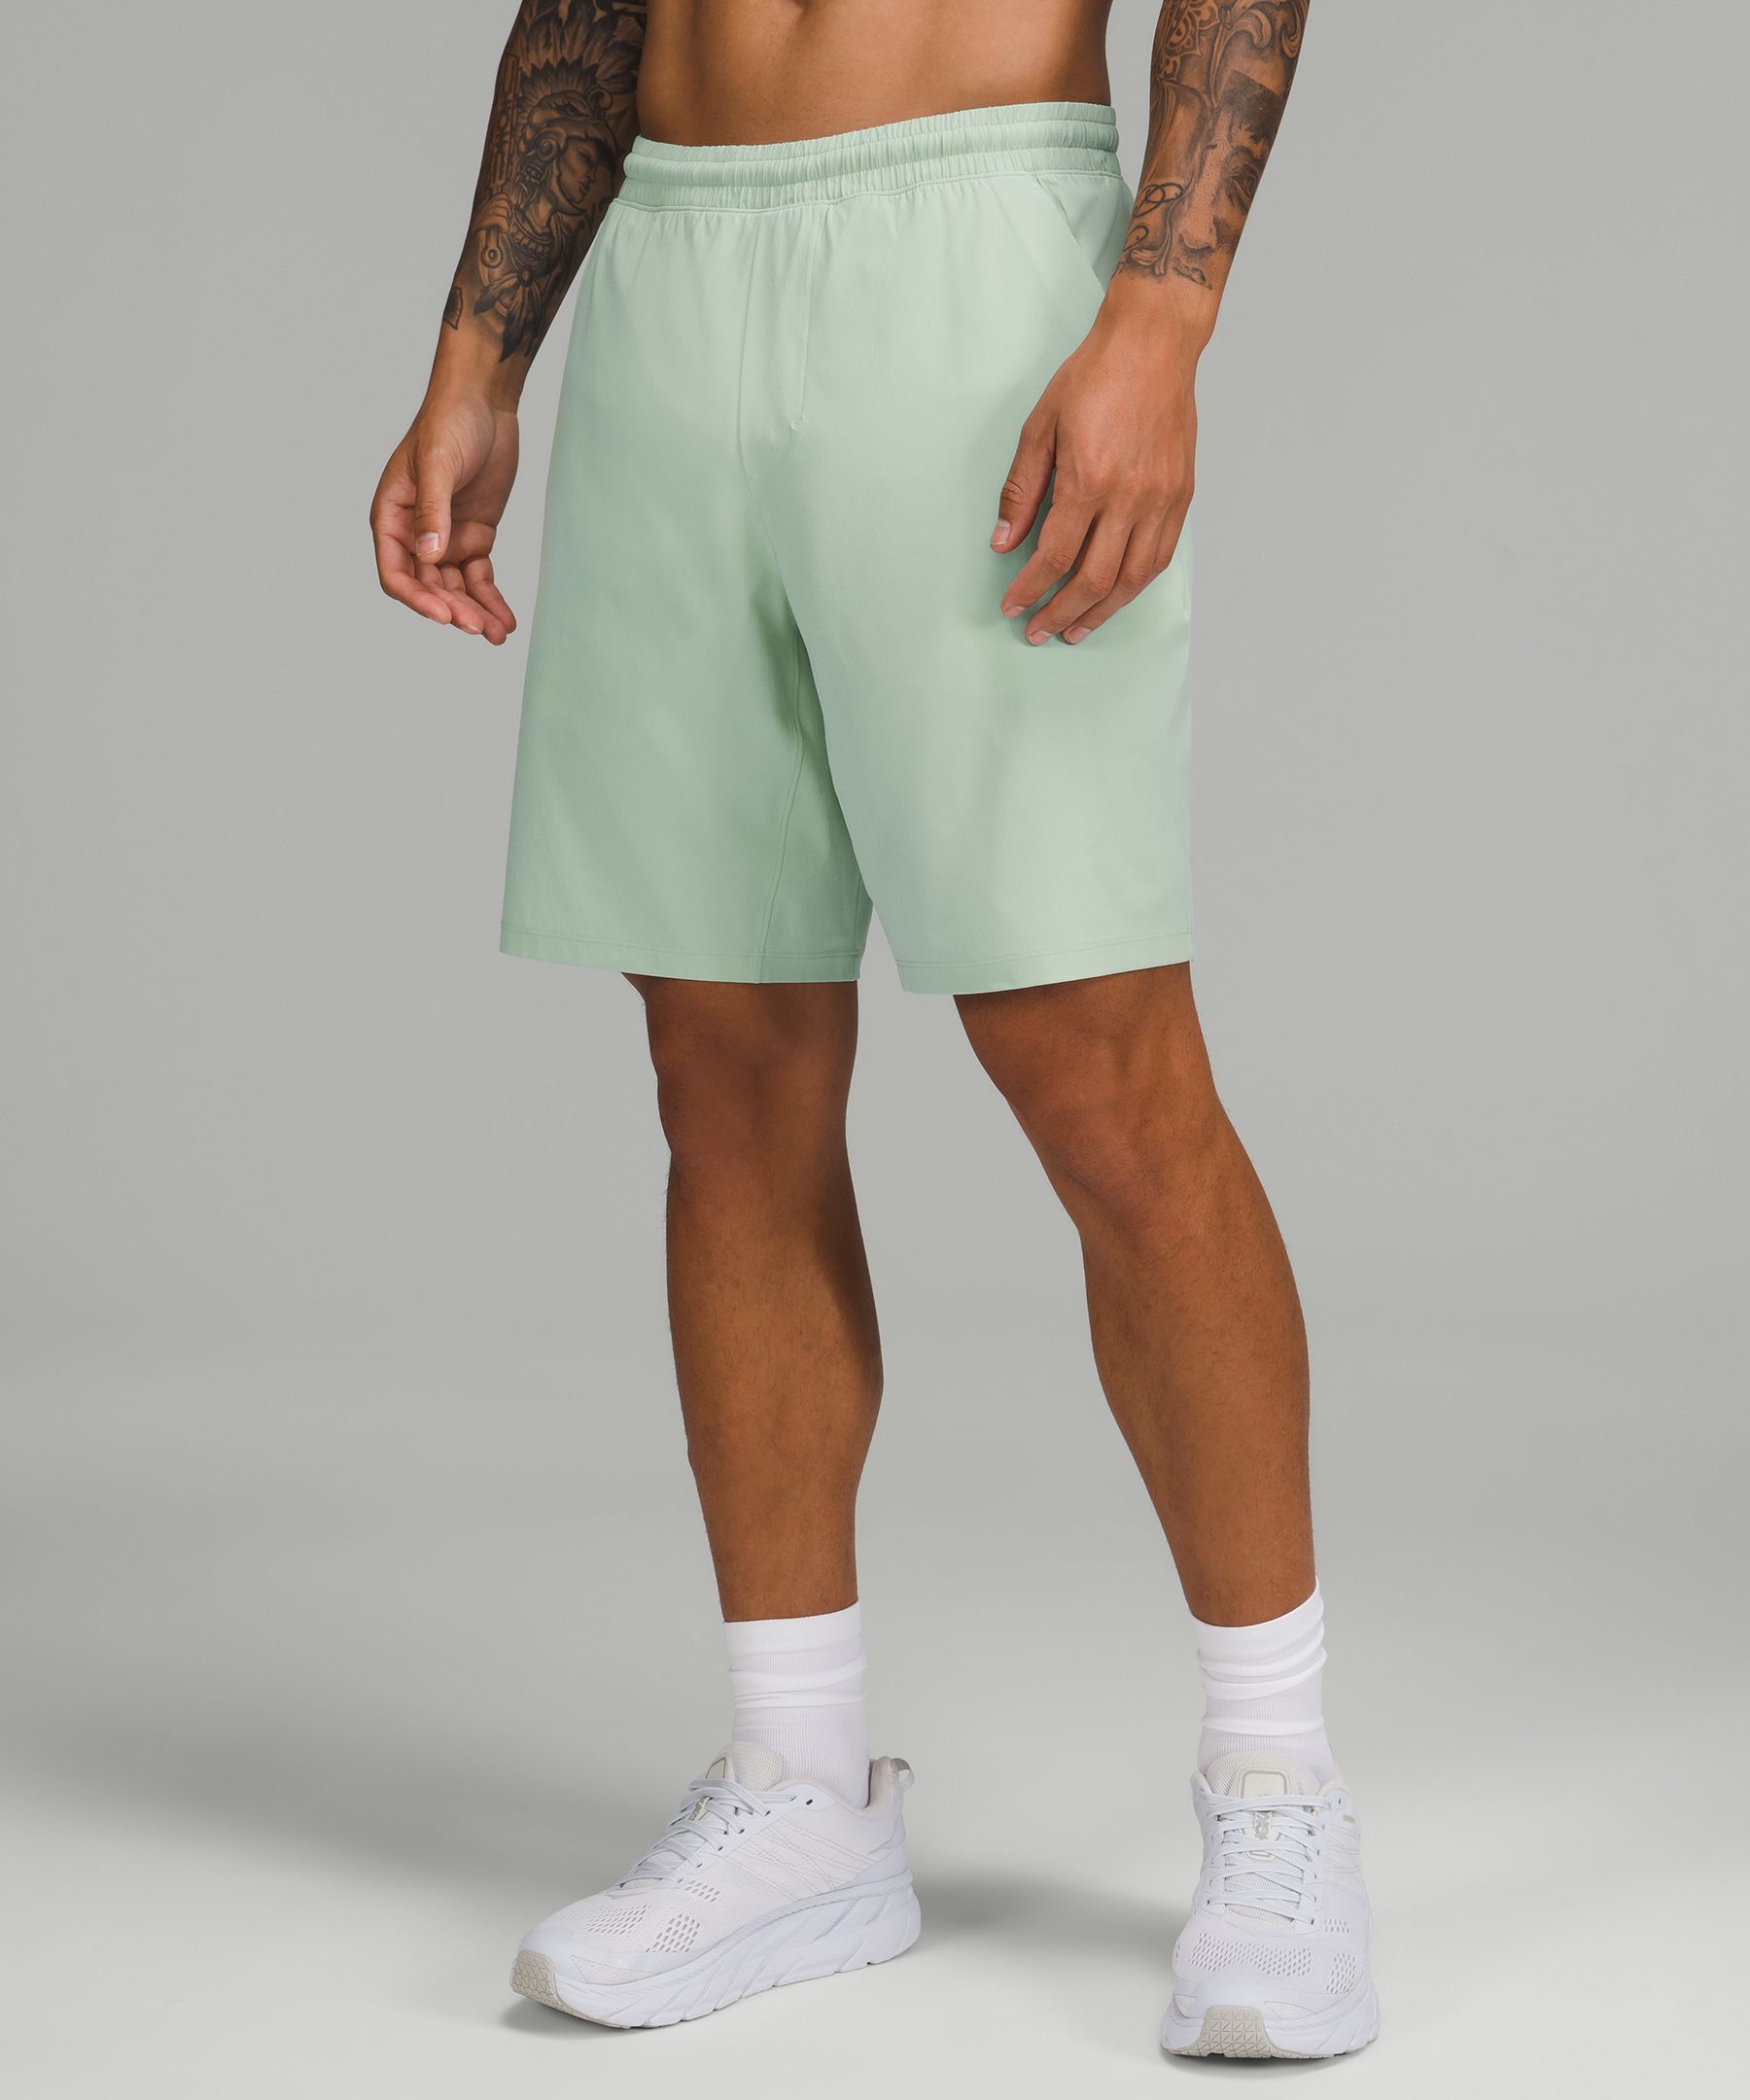 Lululemon Pace Breaker Lined Shorts 9" In Arctic Green